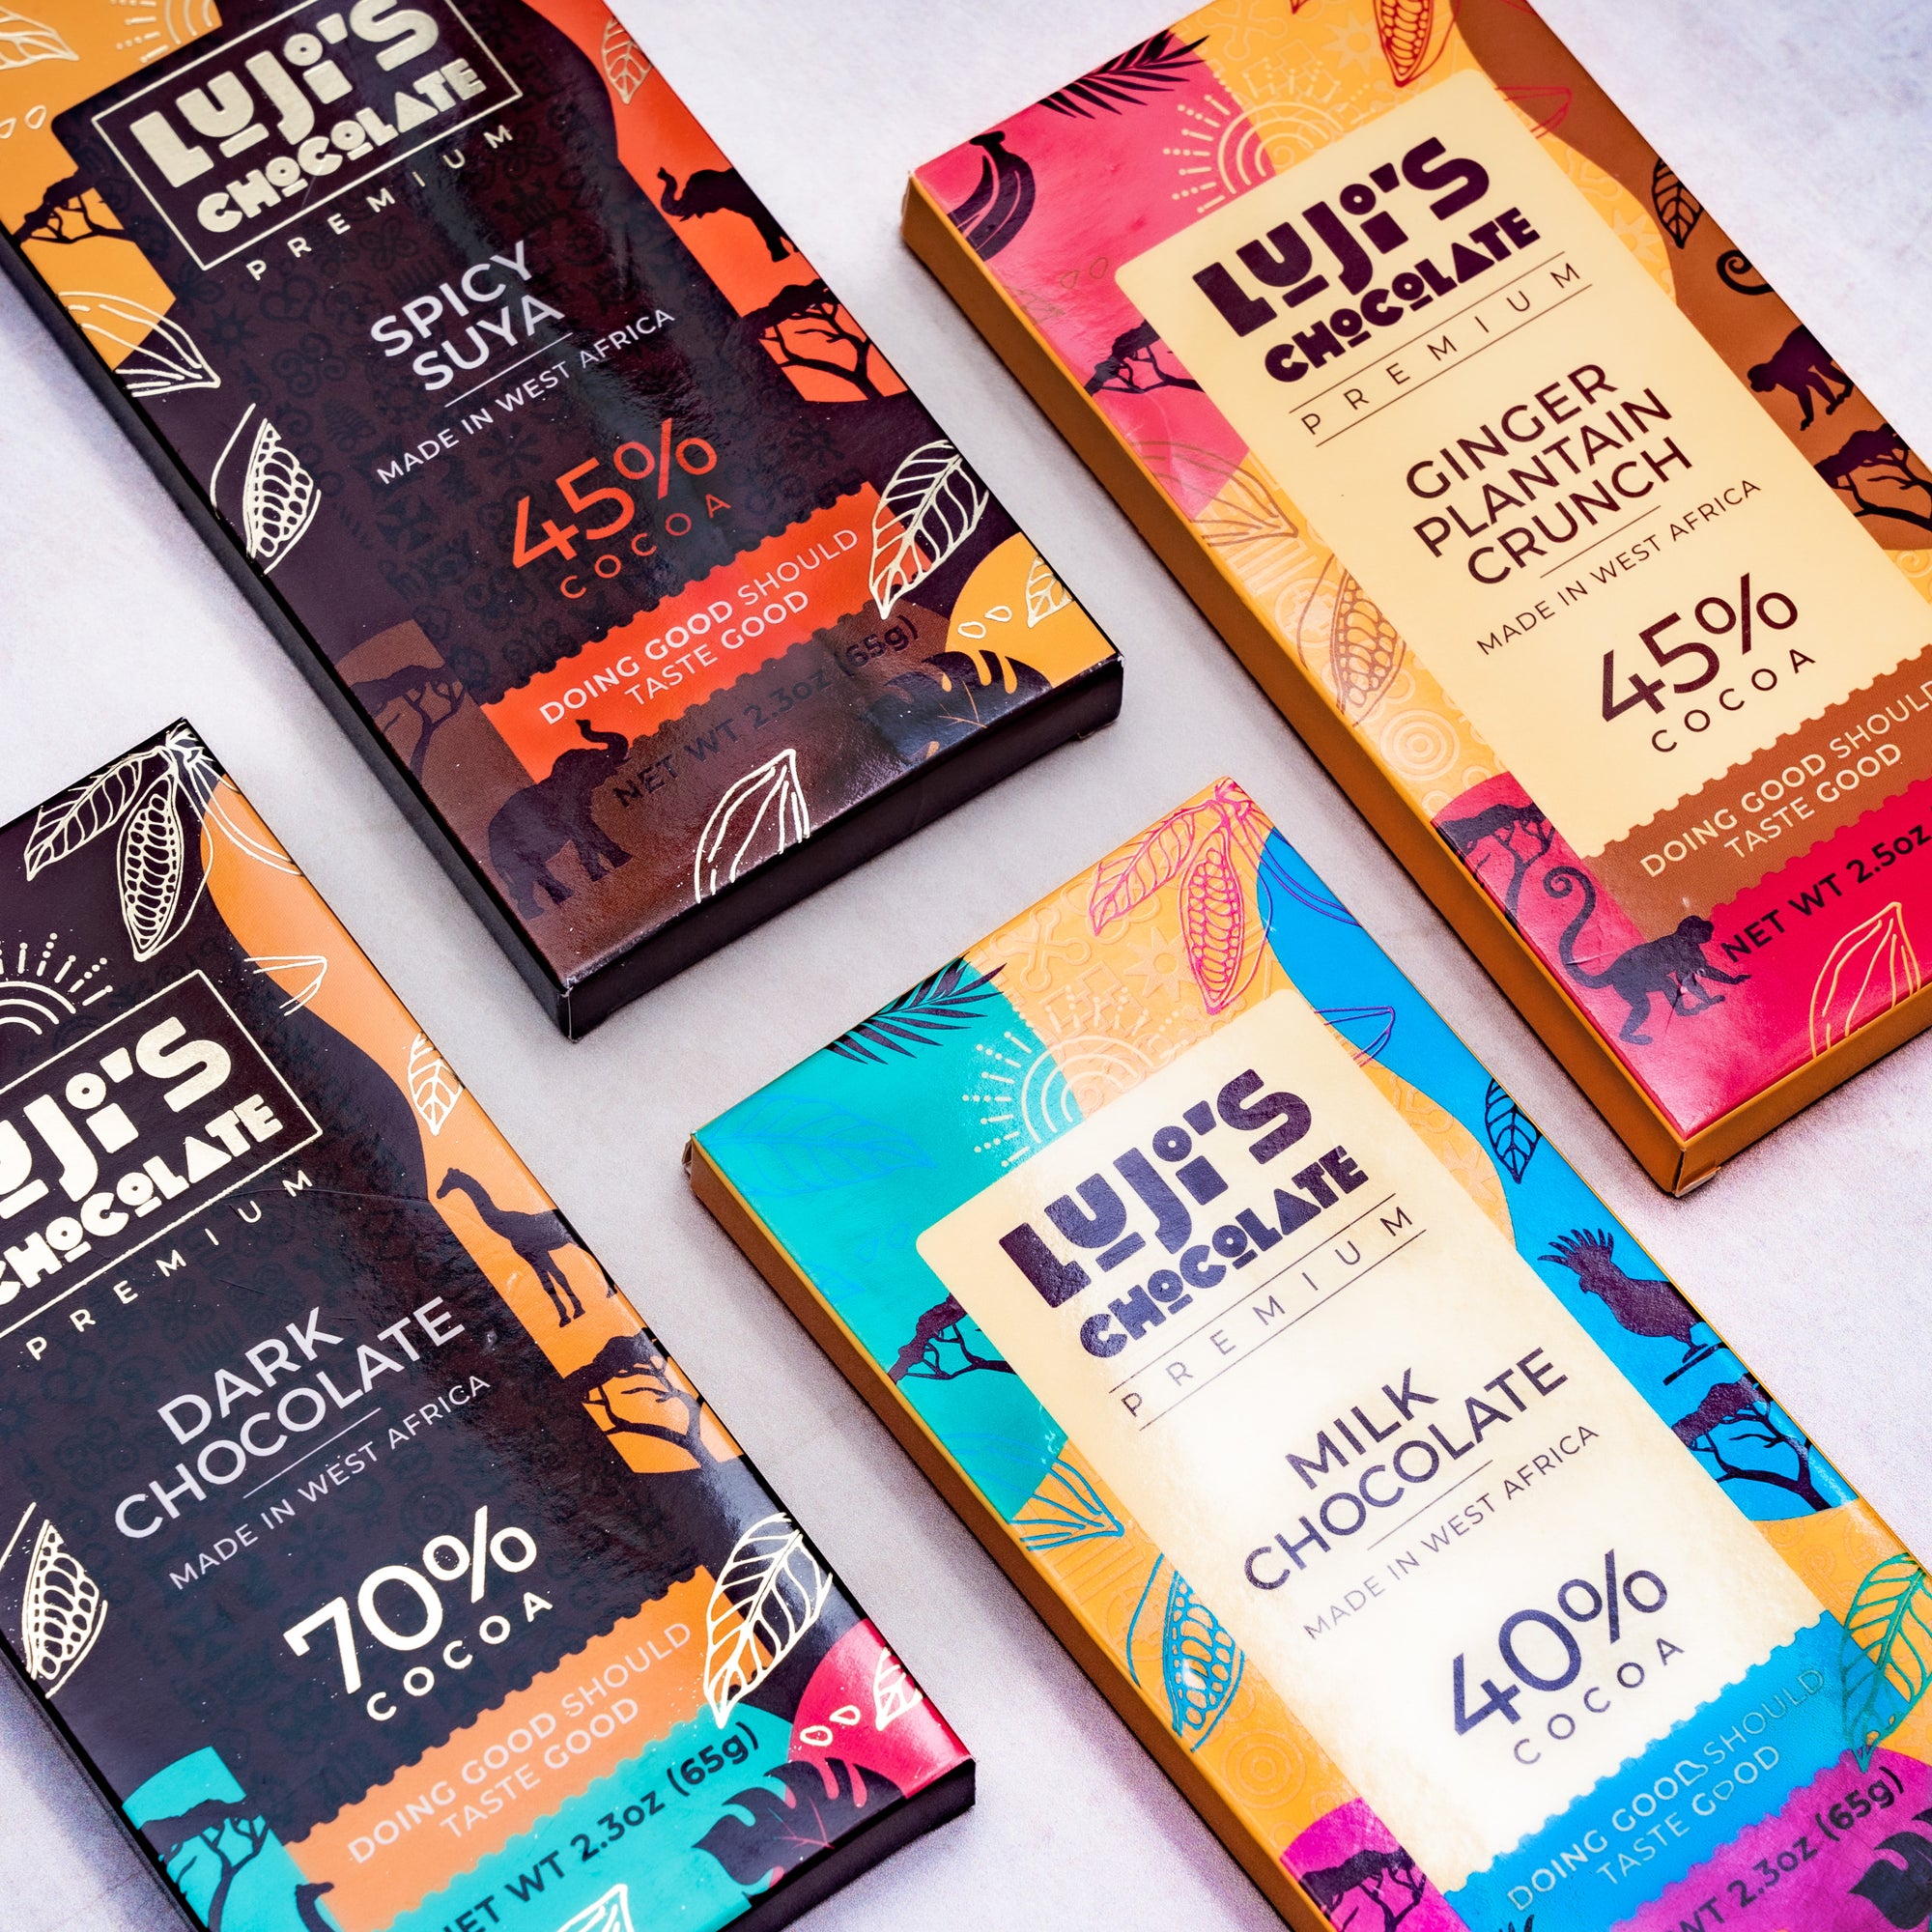 A fanned display of Luji's Chocolate bars in various flavors, each with its unique wrapper design featuring bright colors and African animal silhouettes, against a dark background